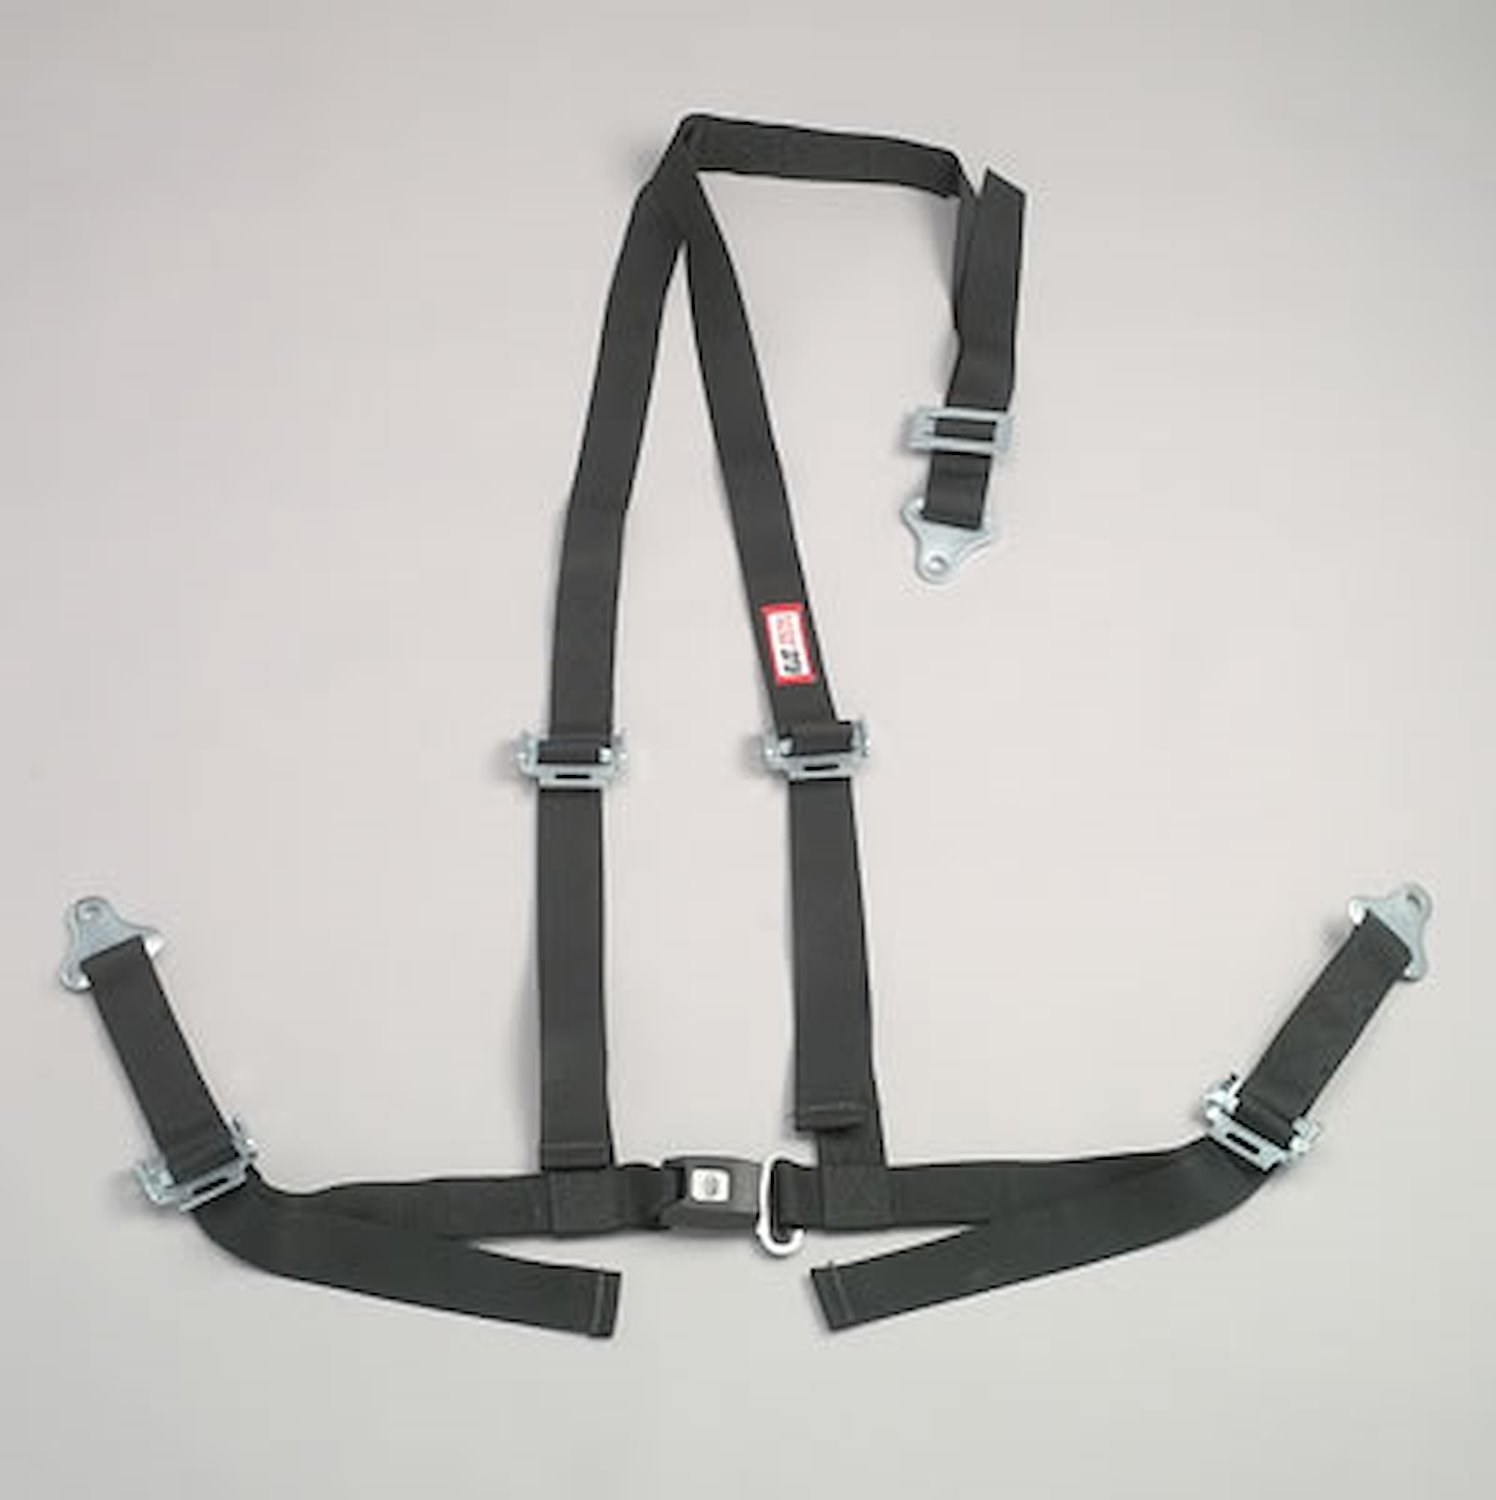 NON-SFI B&T HARNESS 2 PULL DOWN Lap Belt 2 S. H. V ROLL BAR Mount ALL BOLT ENDS w/STERNUM STRAP RED